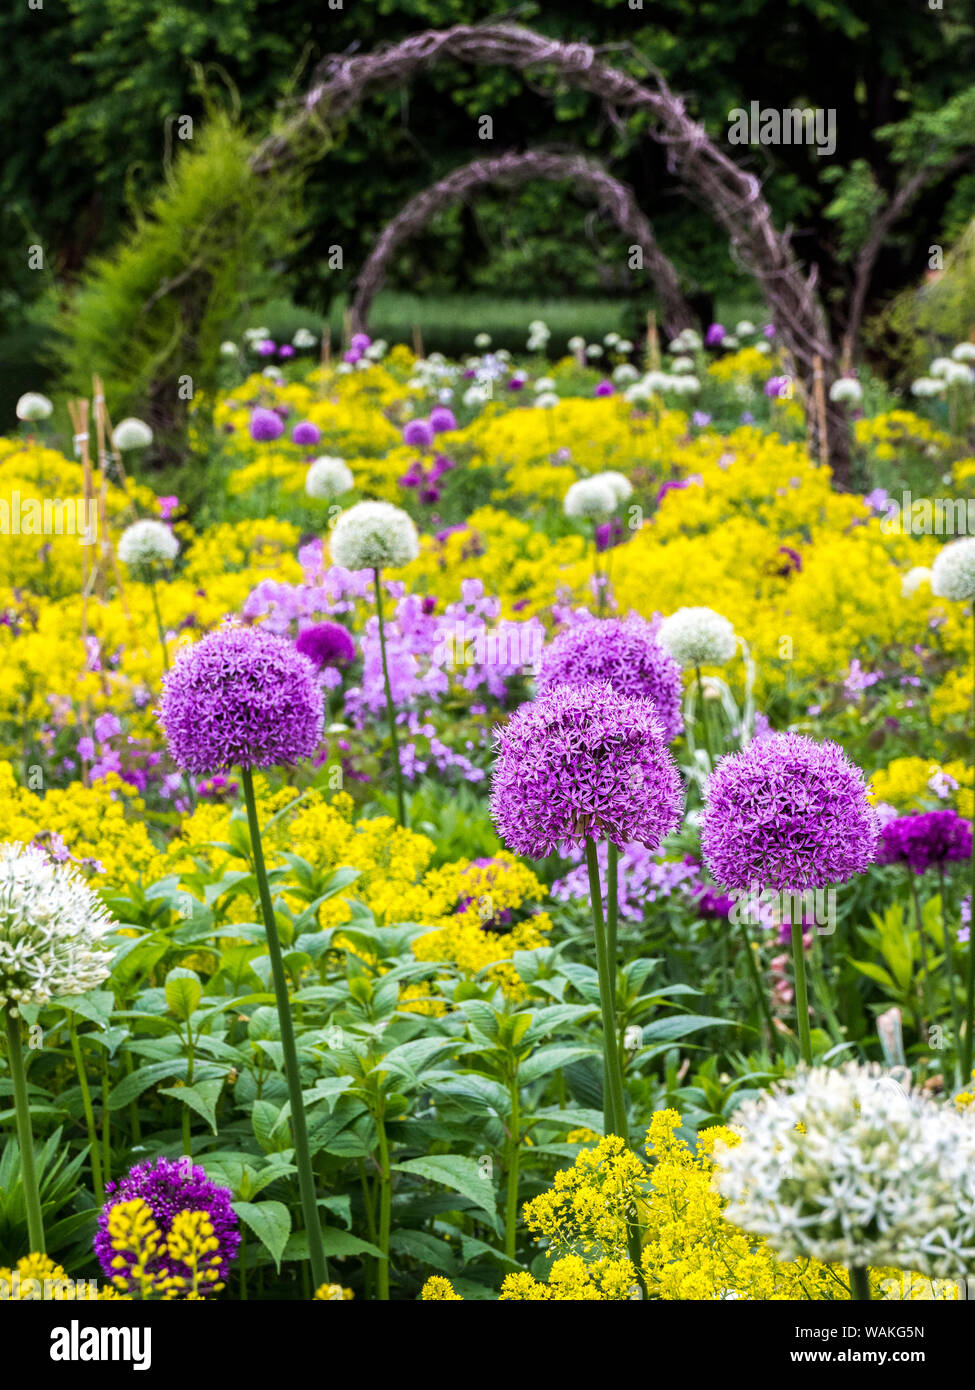 USA, Pennsylvania. Blooming allium amongst yellow flowers with several twig archways. Stock Photo